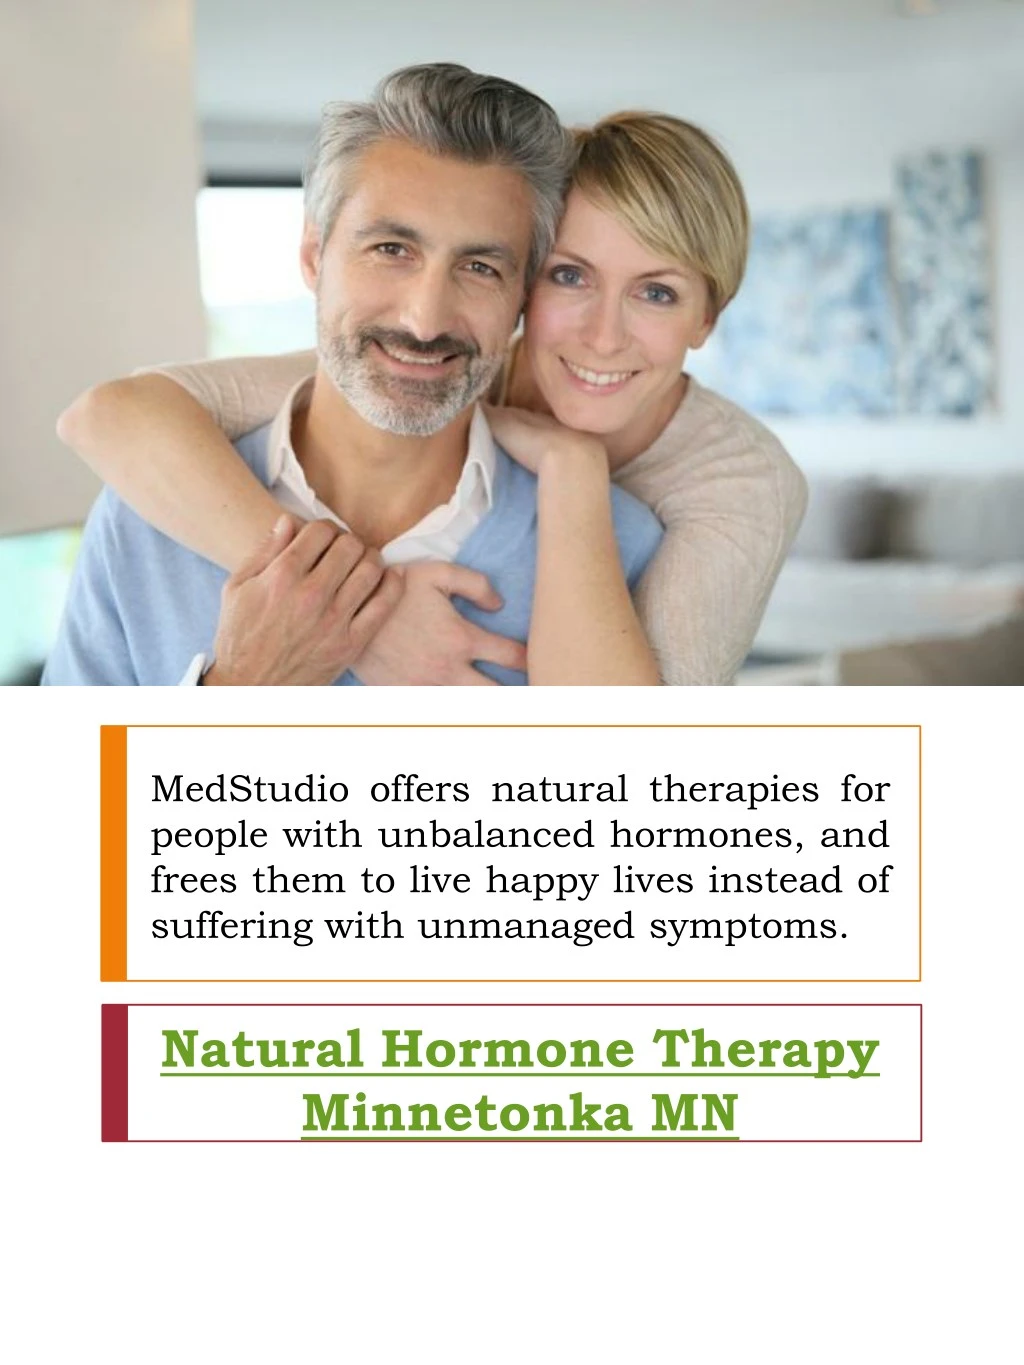 medstudio offers natural therapies for people